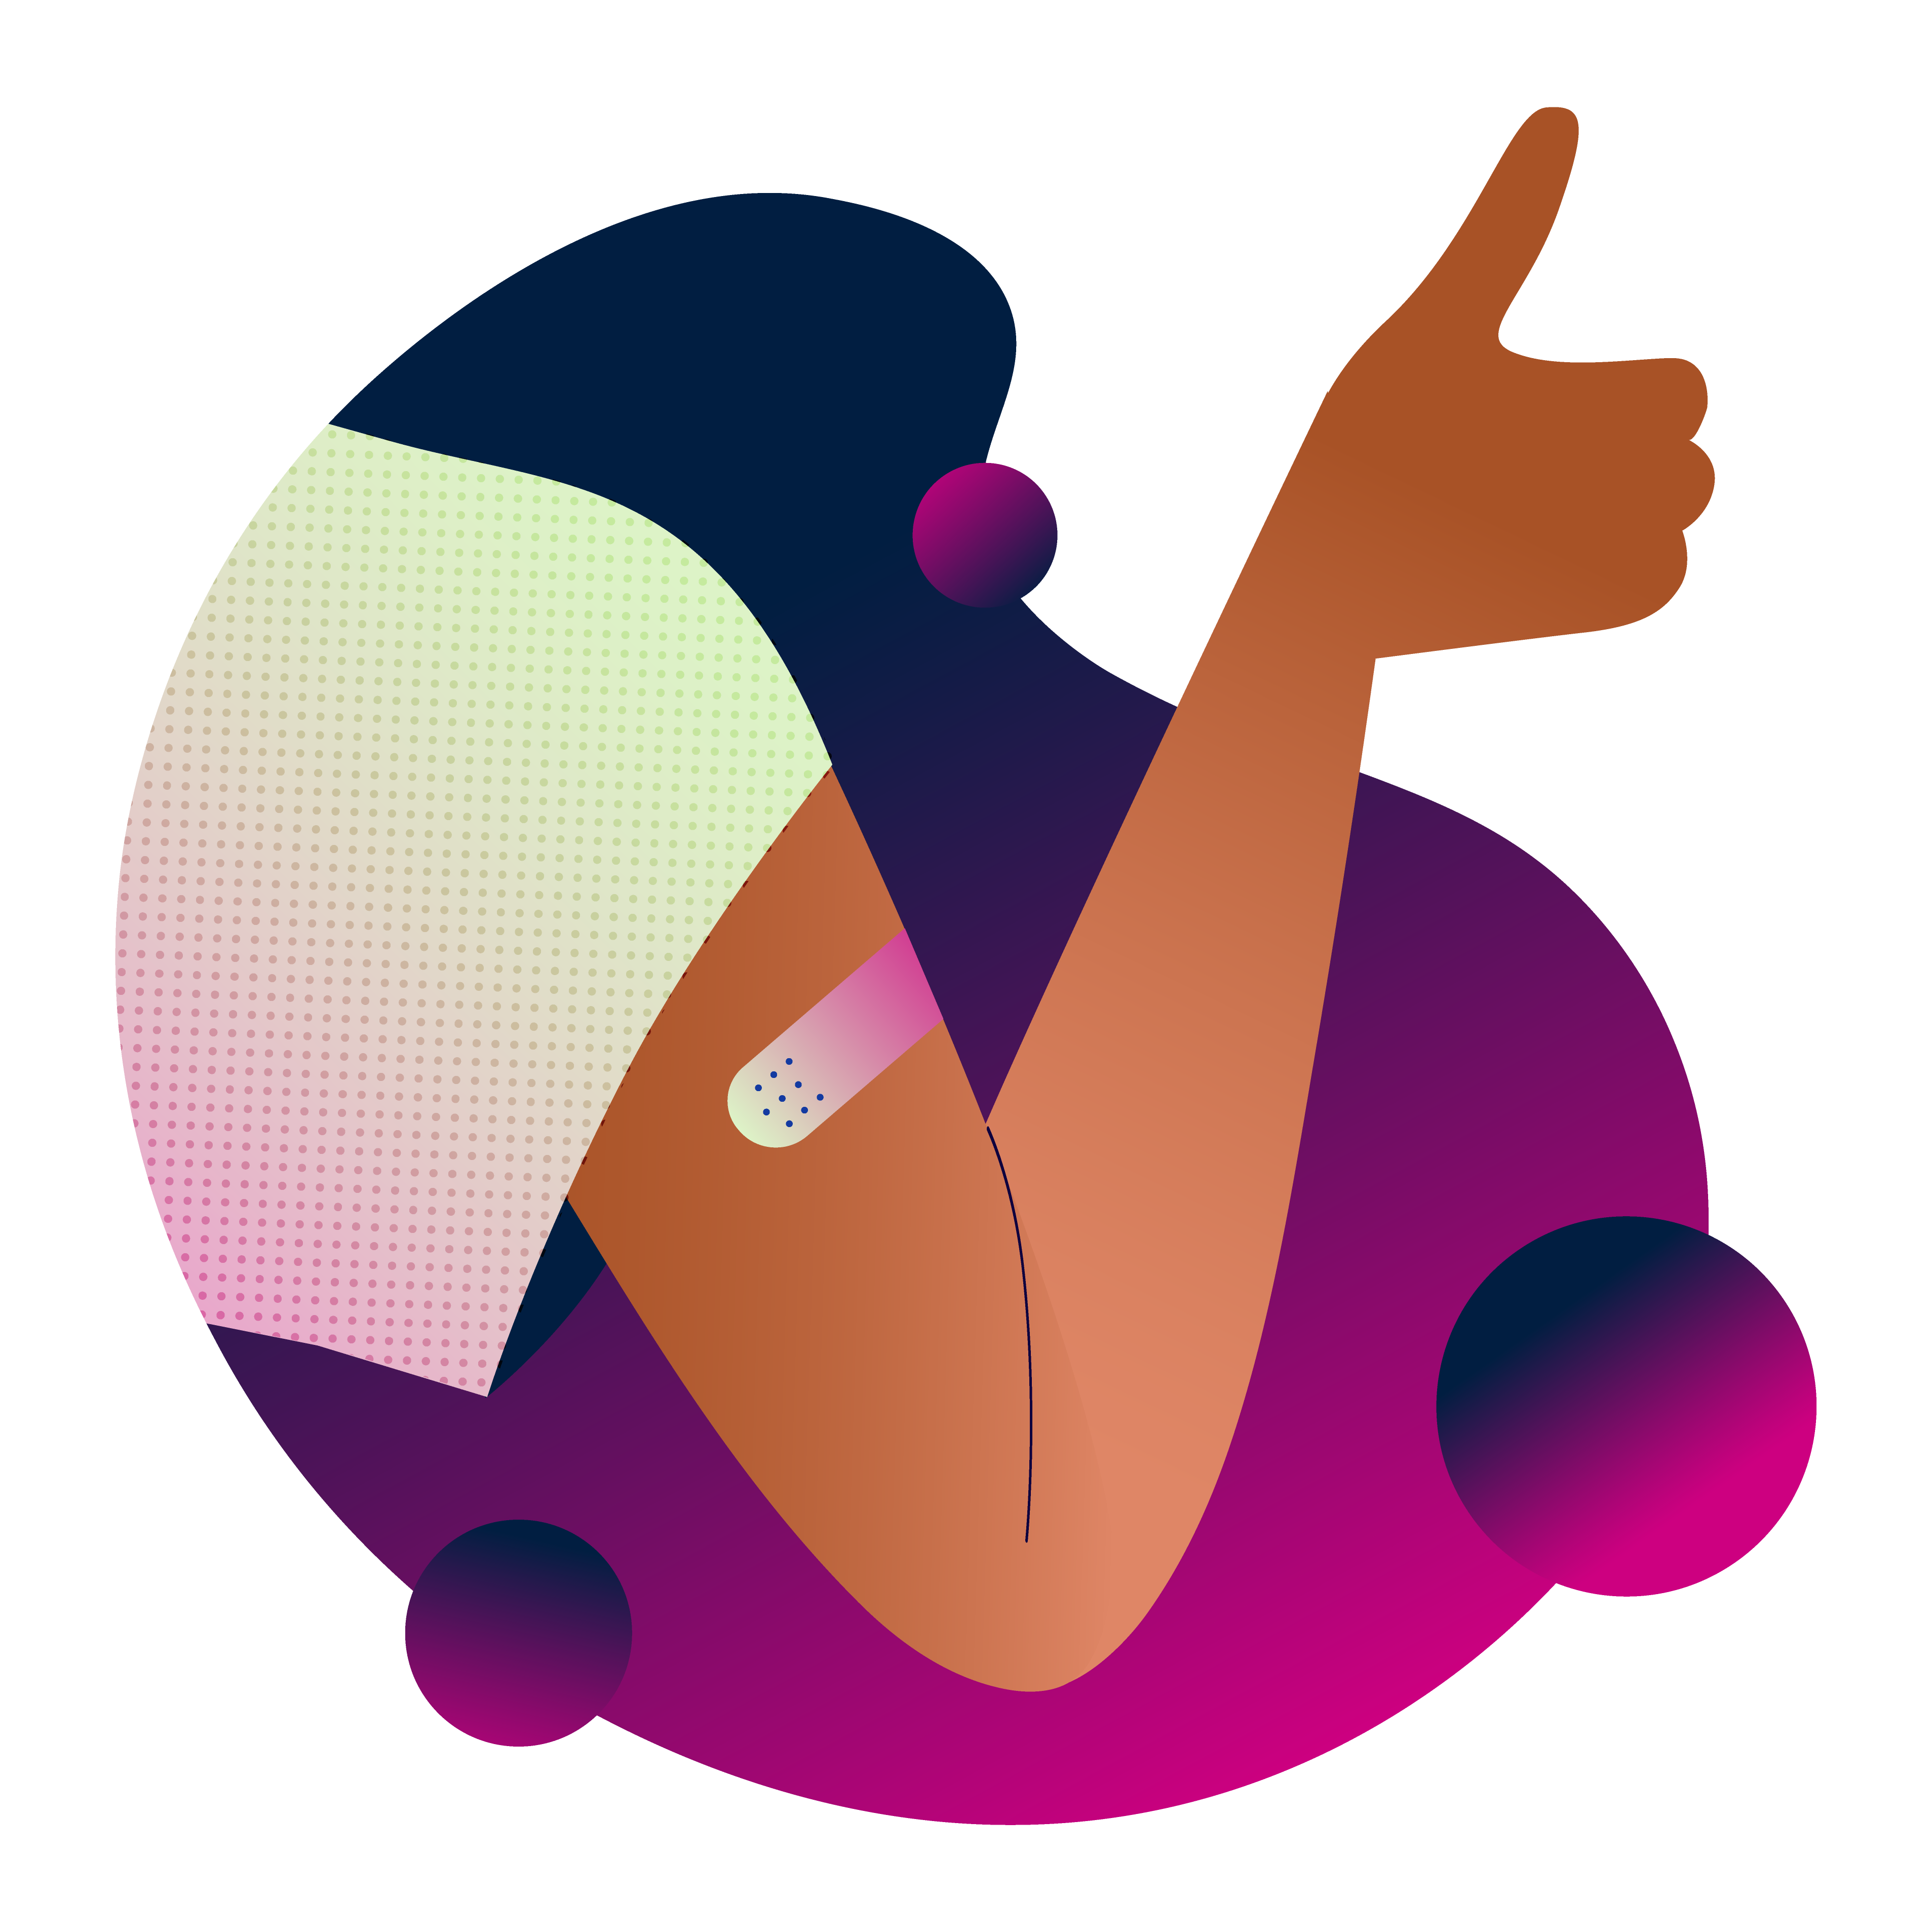 Stylized illustration of a person giving a thumbs-up while wearing a bandage on their arm